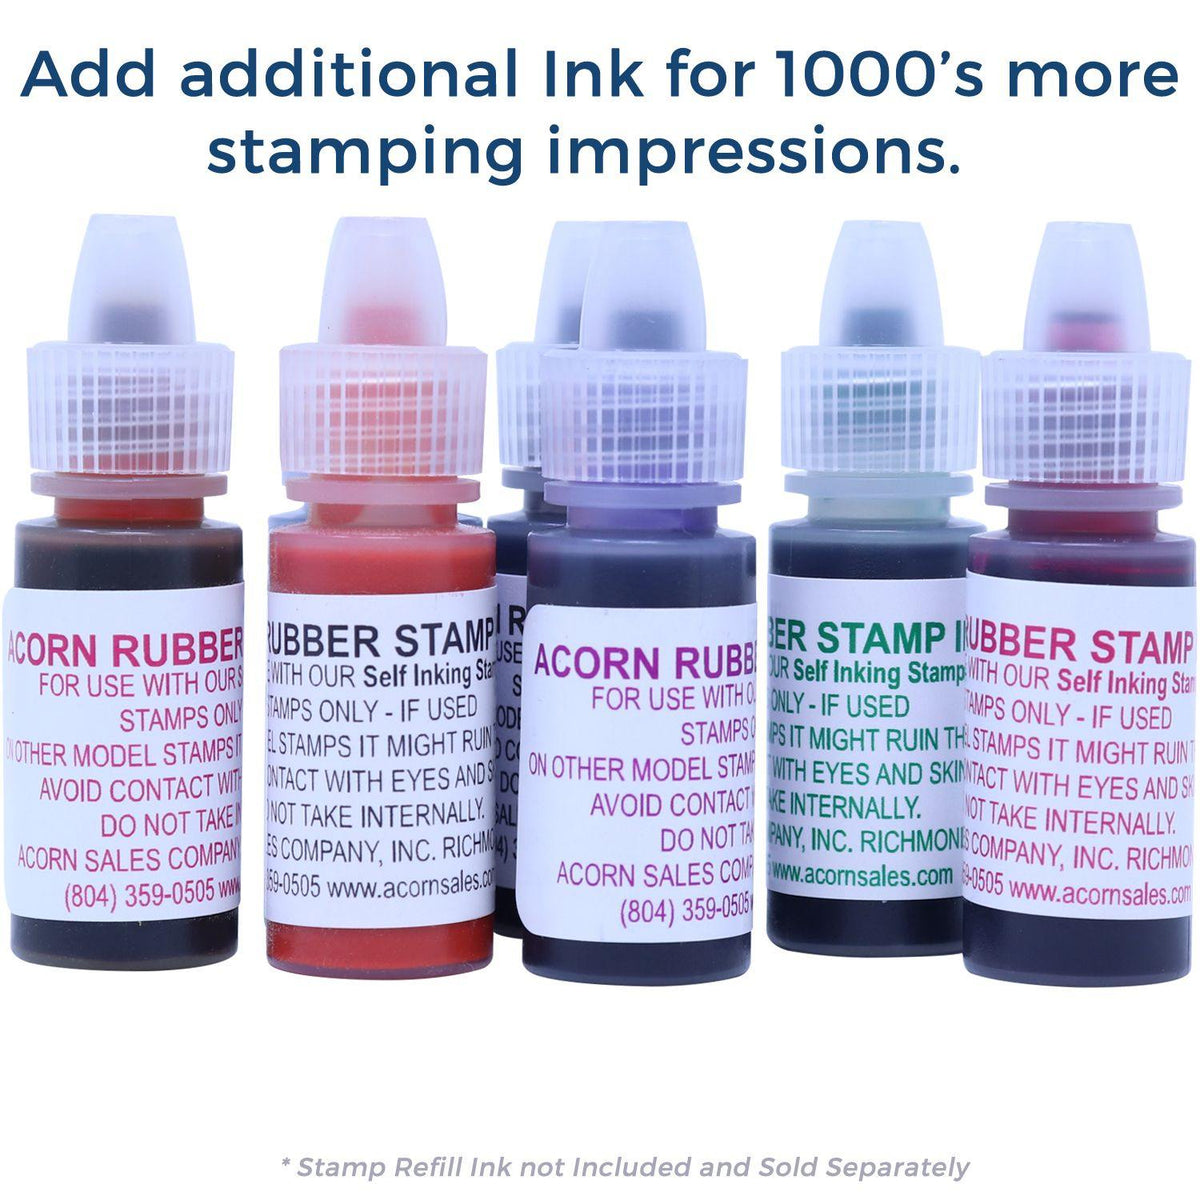 Refill Inks for Slim Pre-Inked Void with Strikelines Stamp Available